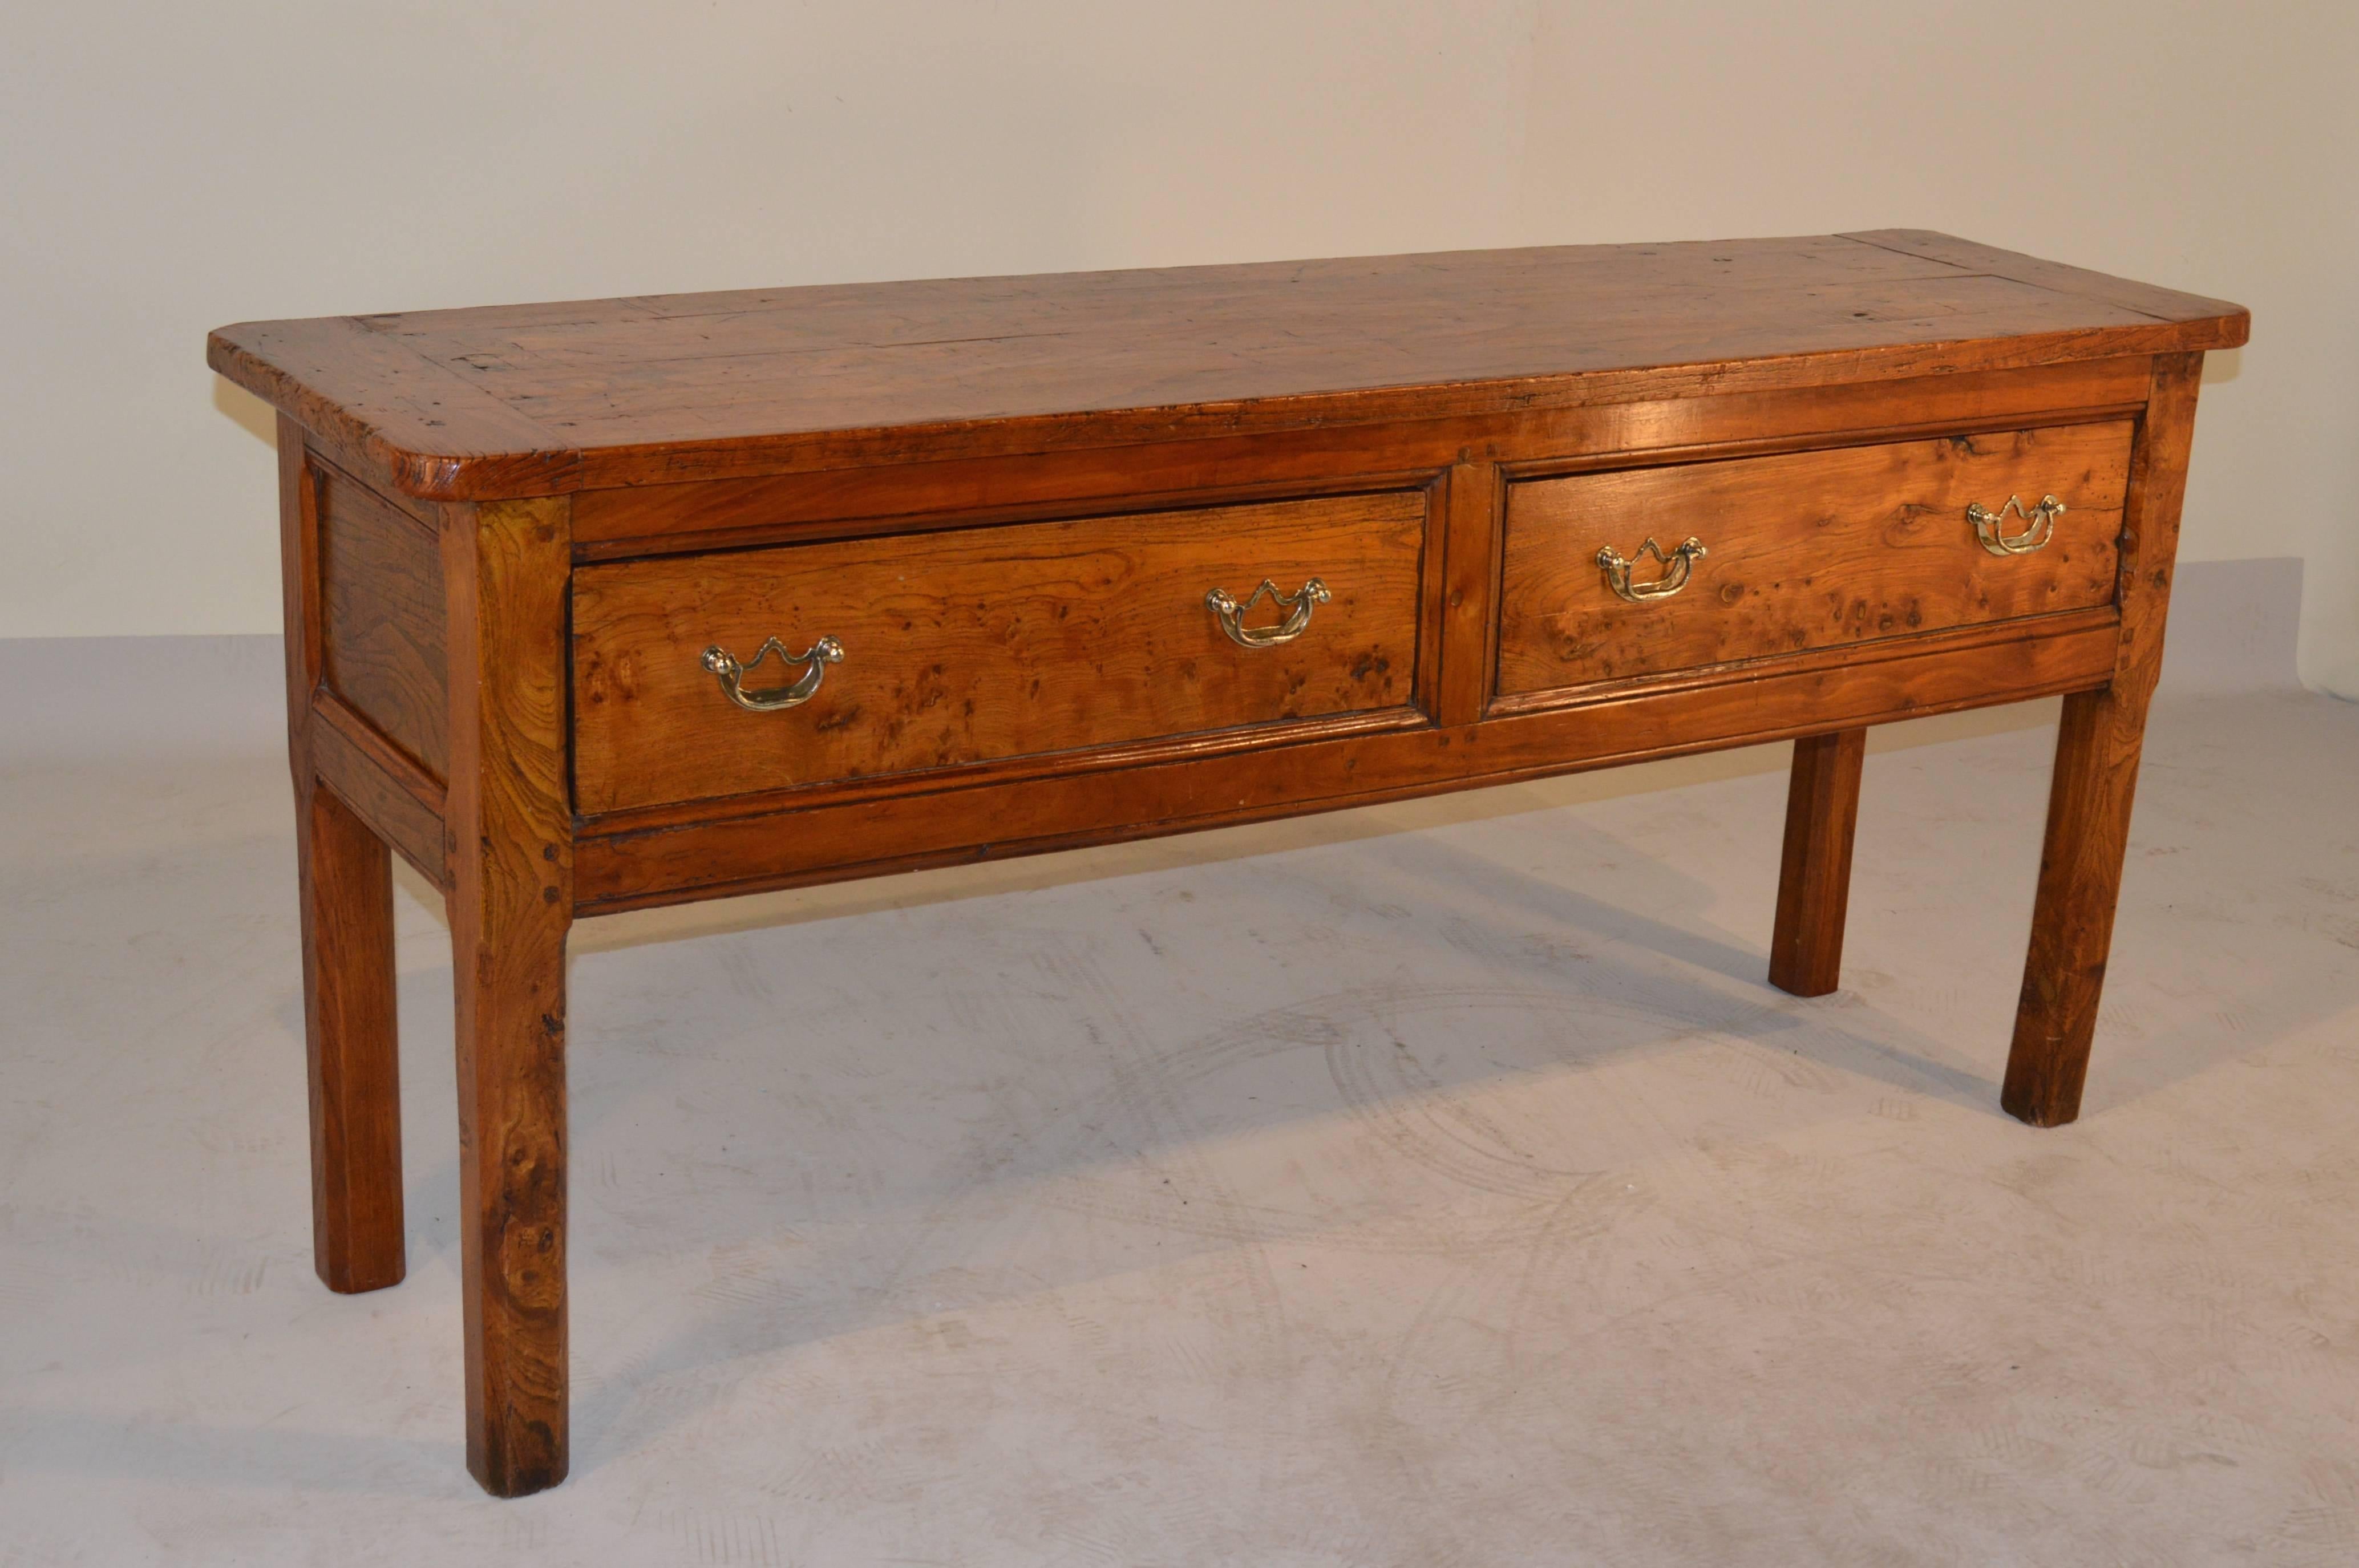 18th century English elm server with a four board top, which is banded on the ends to prevent shrinkage. The apron contains two large drawers, and the piece is panelled on the sides. The piece is raised on chamfered block legs.